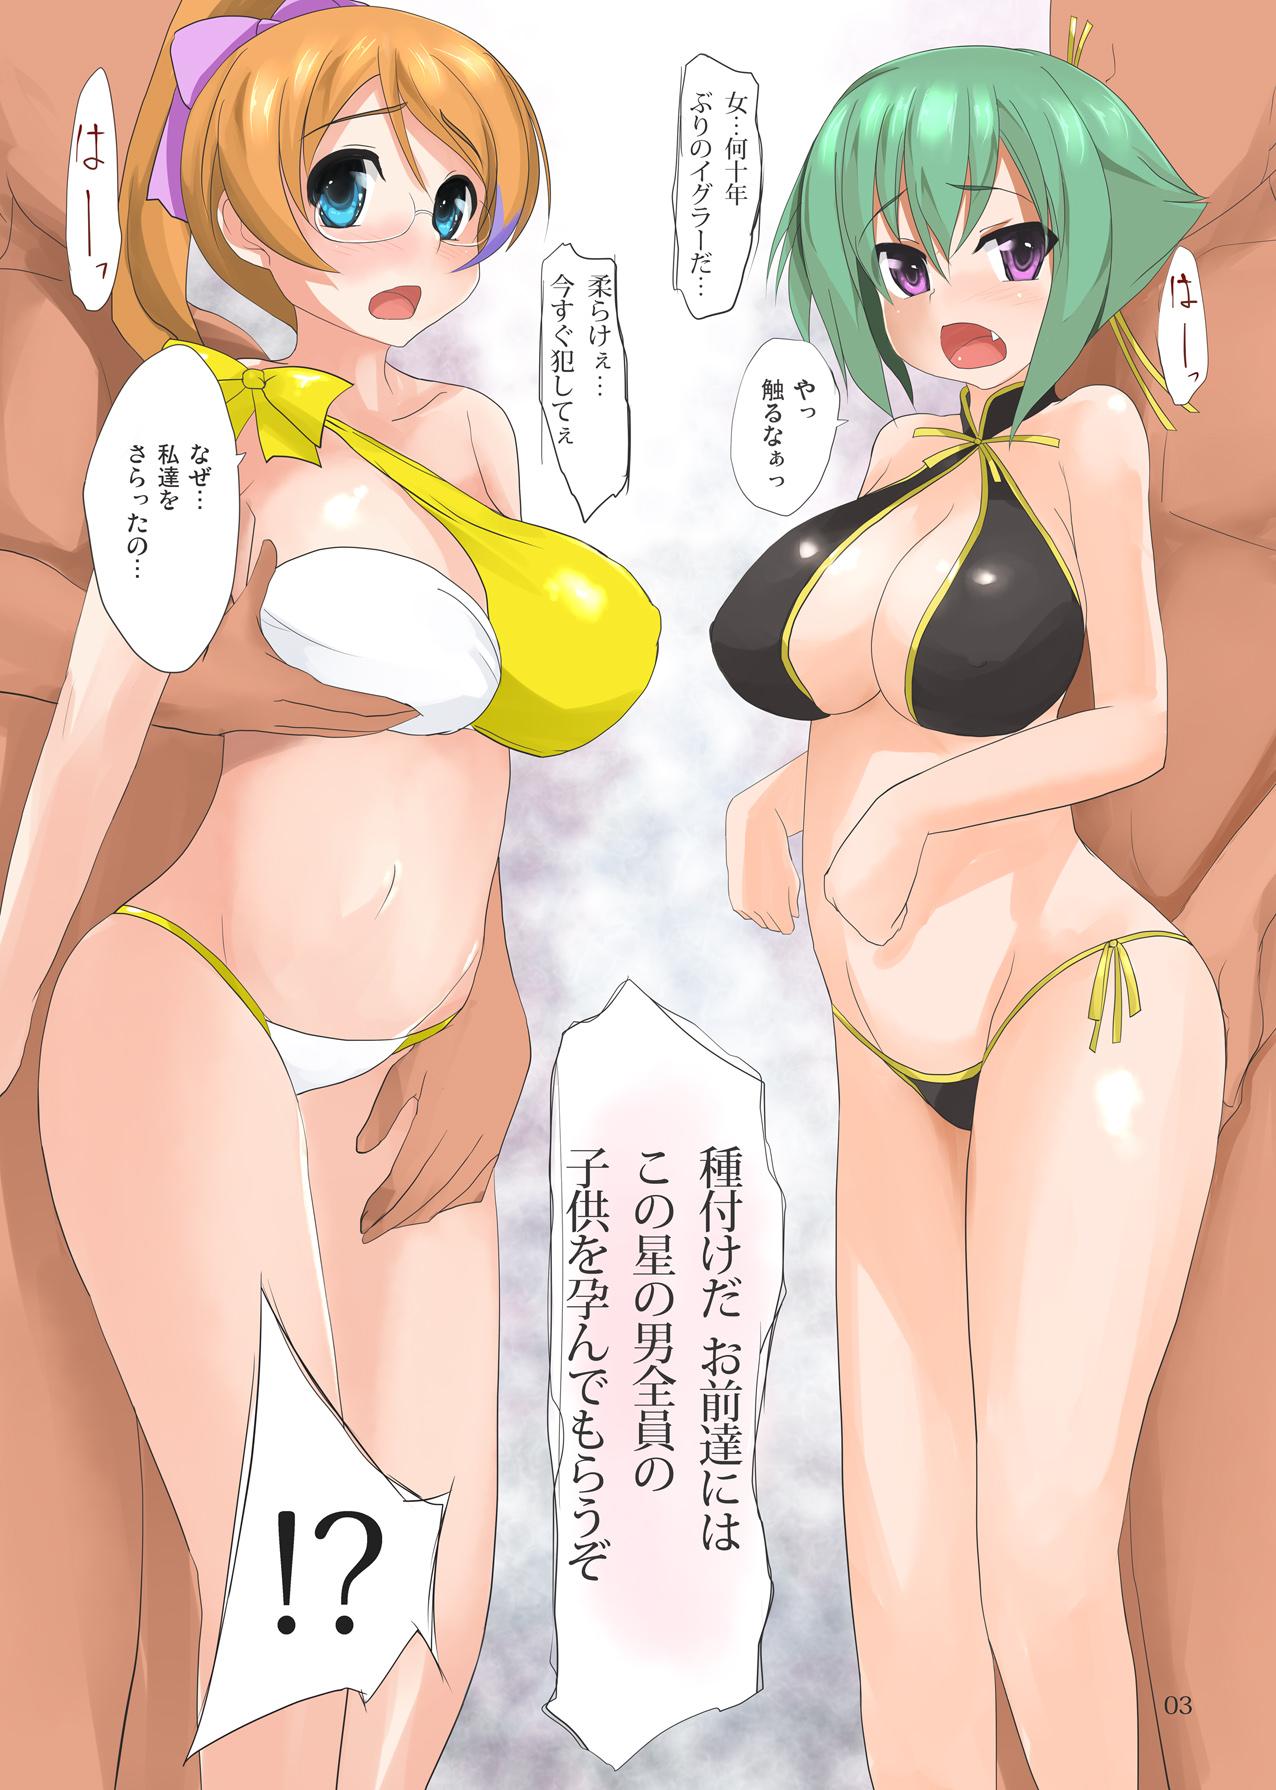 Transsexual Full Color de Zessica to MIX wo Sokuhameshite Haramaseru Usui Hon - Aquarion evol Abuse - Page 4